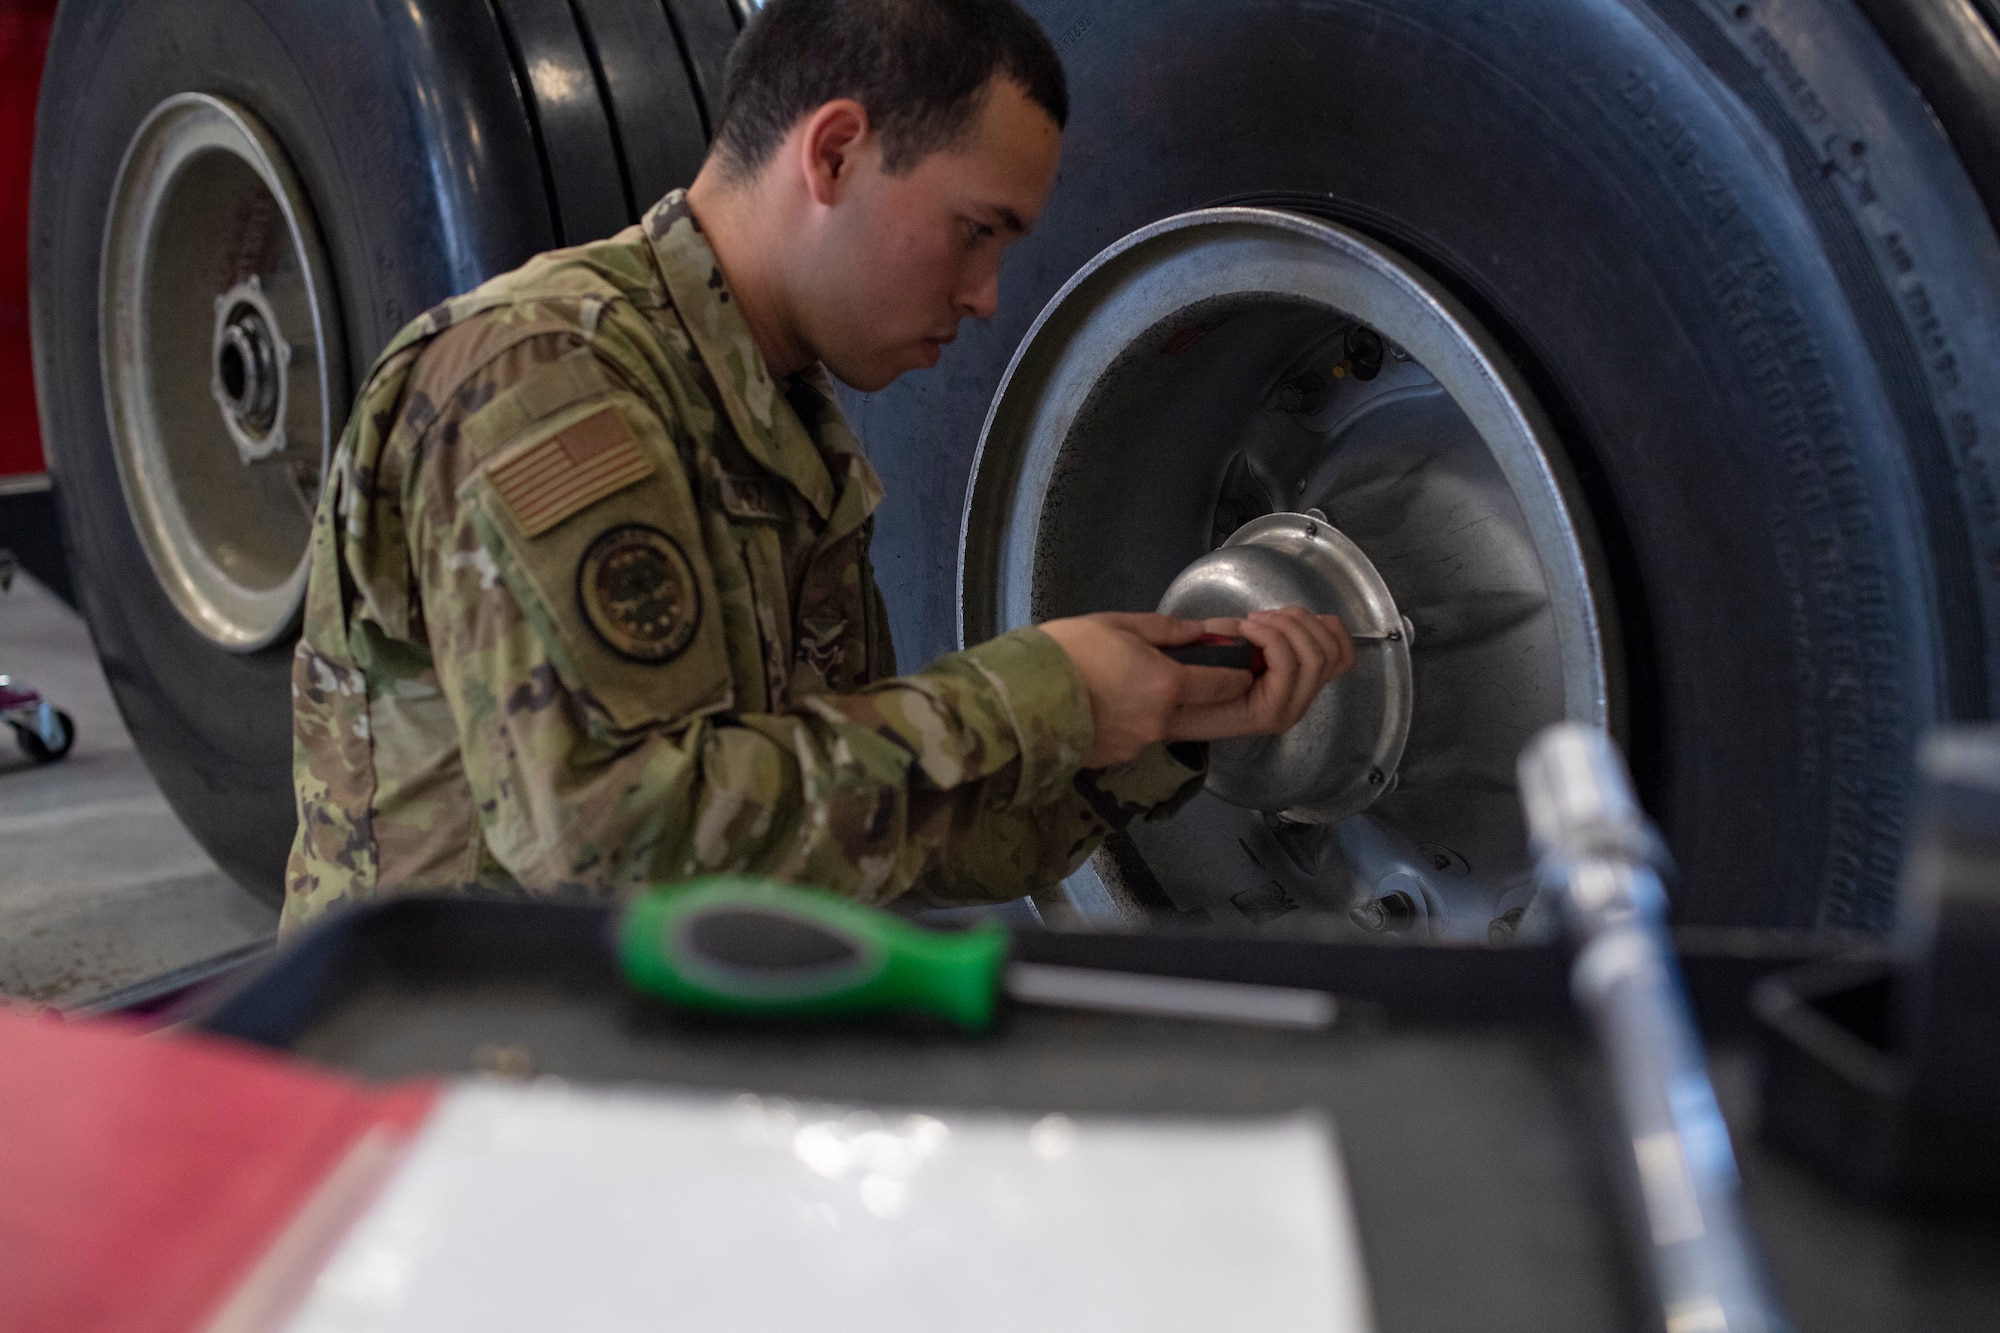 Airman 1st Class Eddy Lopez of Jersey City, New Jersey, goes through the steps of removing a tire and wheel from a landing gear assembly trainer at Sheppard Air Force Base, Texas, March 3, 2020. Lopez and his fellow 362nd Training Squadron heavy crew chief students learned the steps via virtual reality and then transfered their technology instruction to hands-on practice. The initiative is part of Maintenance Next, which is new method of employing technology to train today's aircraft maintainers. (U.S. Air Force photo by John Ingle)